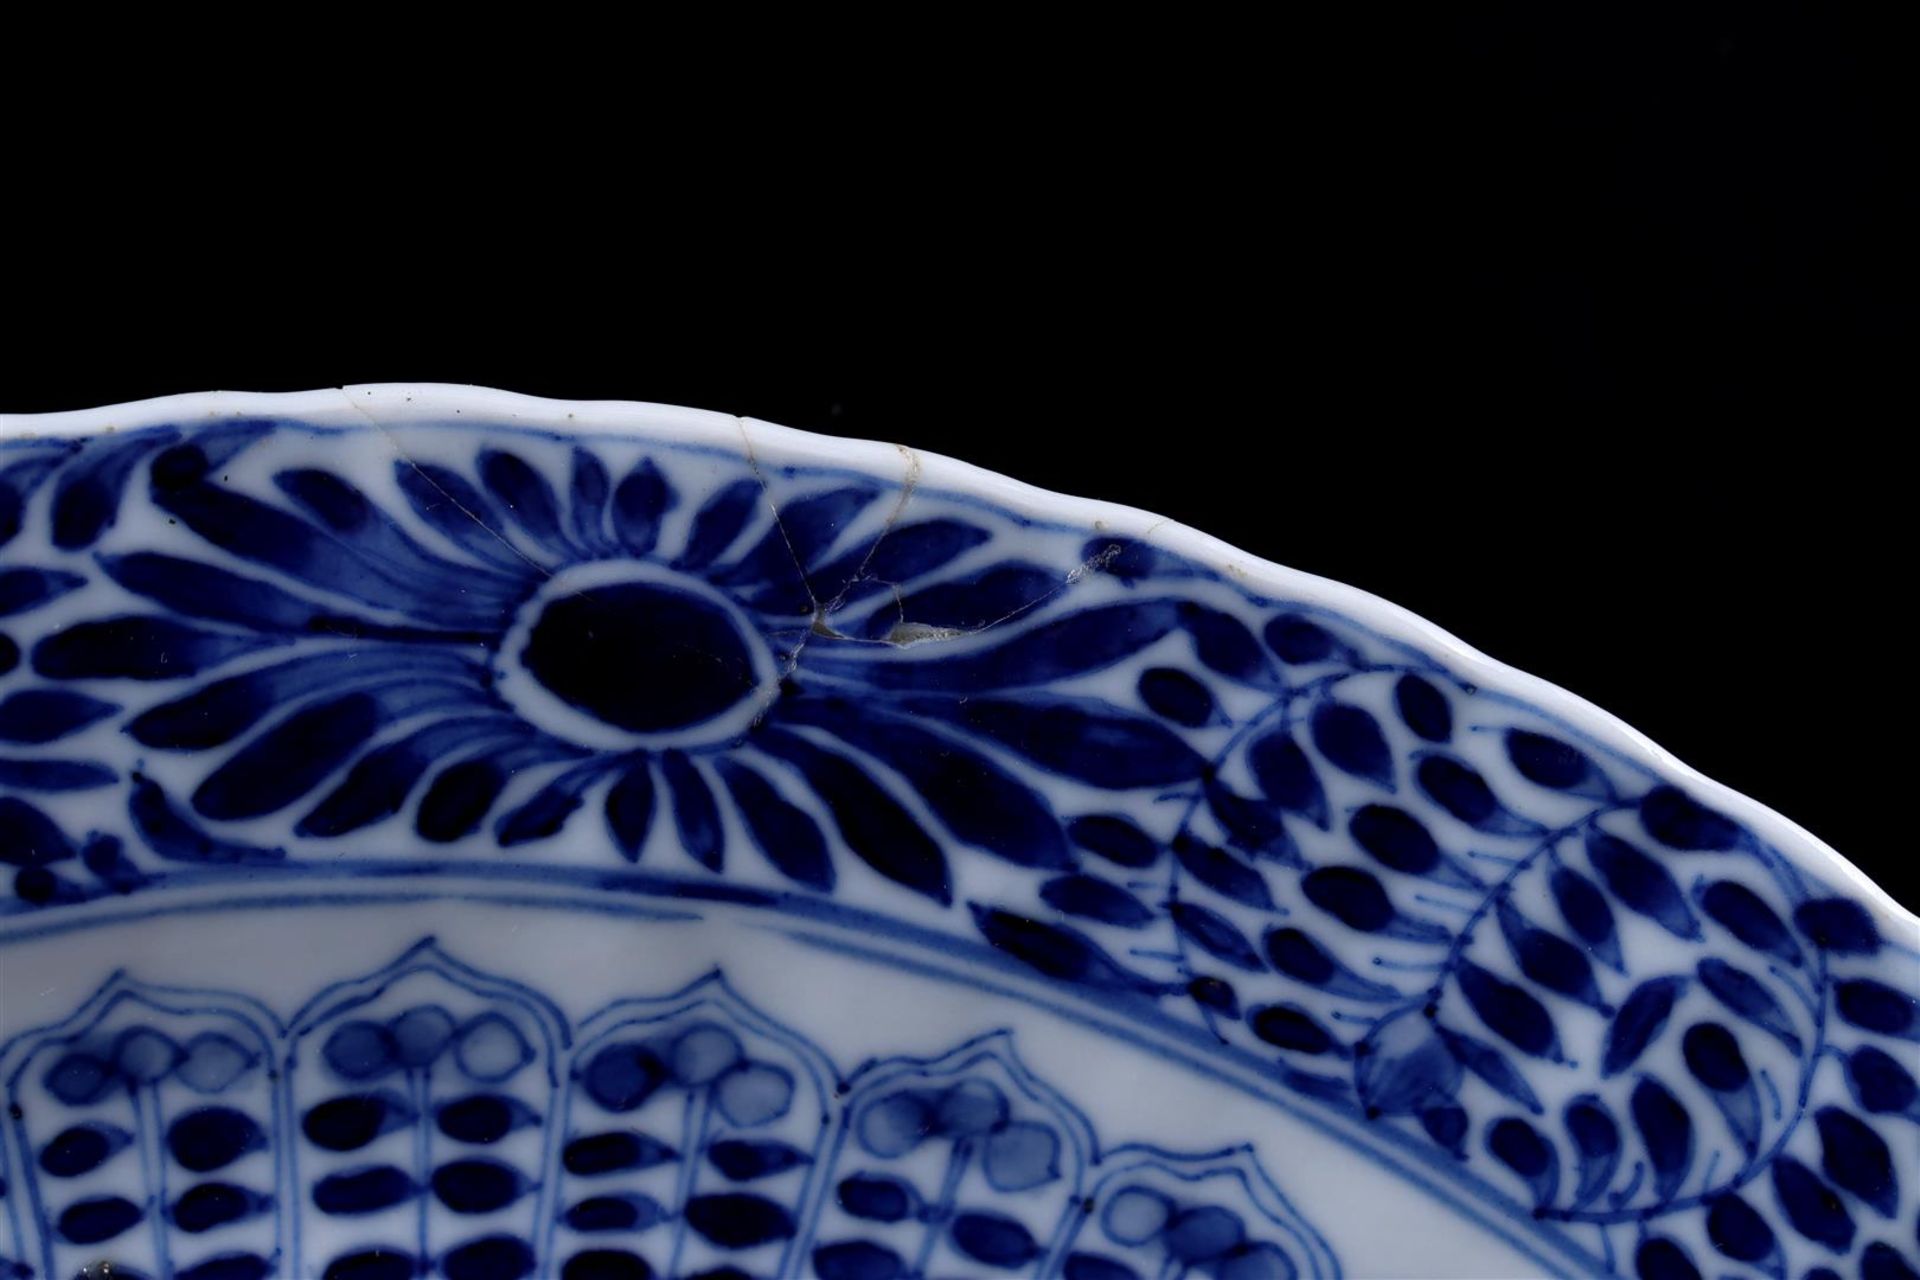 Porcelain dish with blue and white fish décor - Image 4 of 8